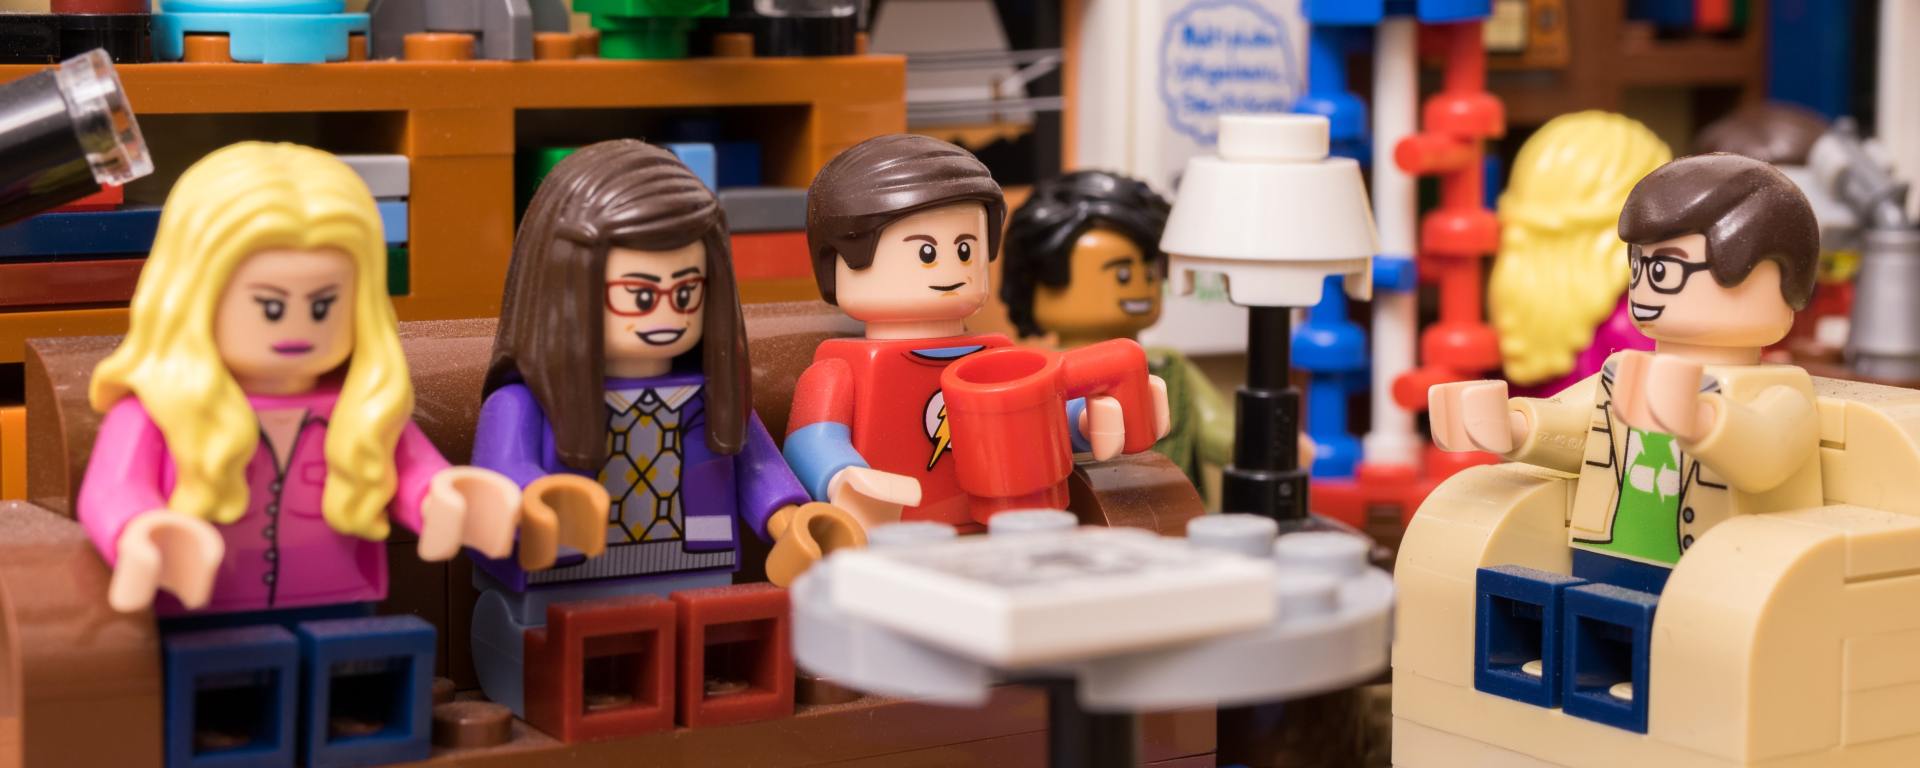 Lego set meant to look like The Big Bang Theory characters and set